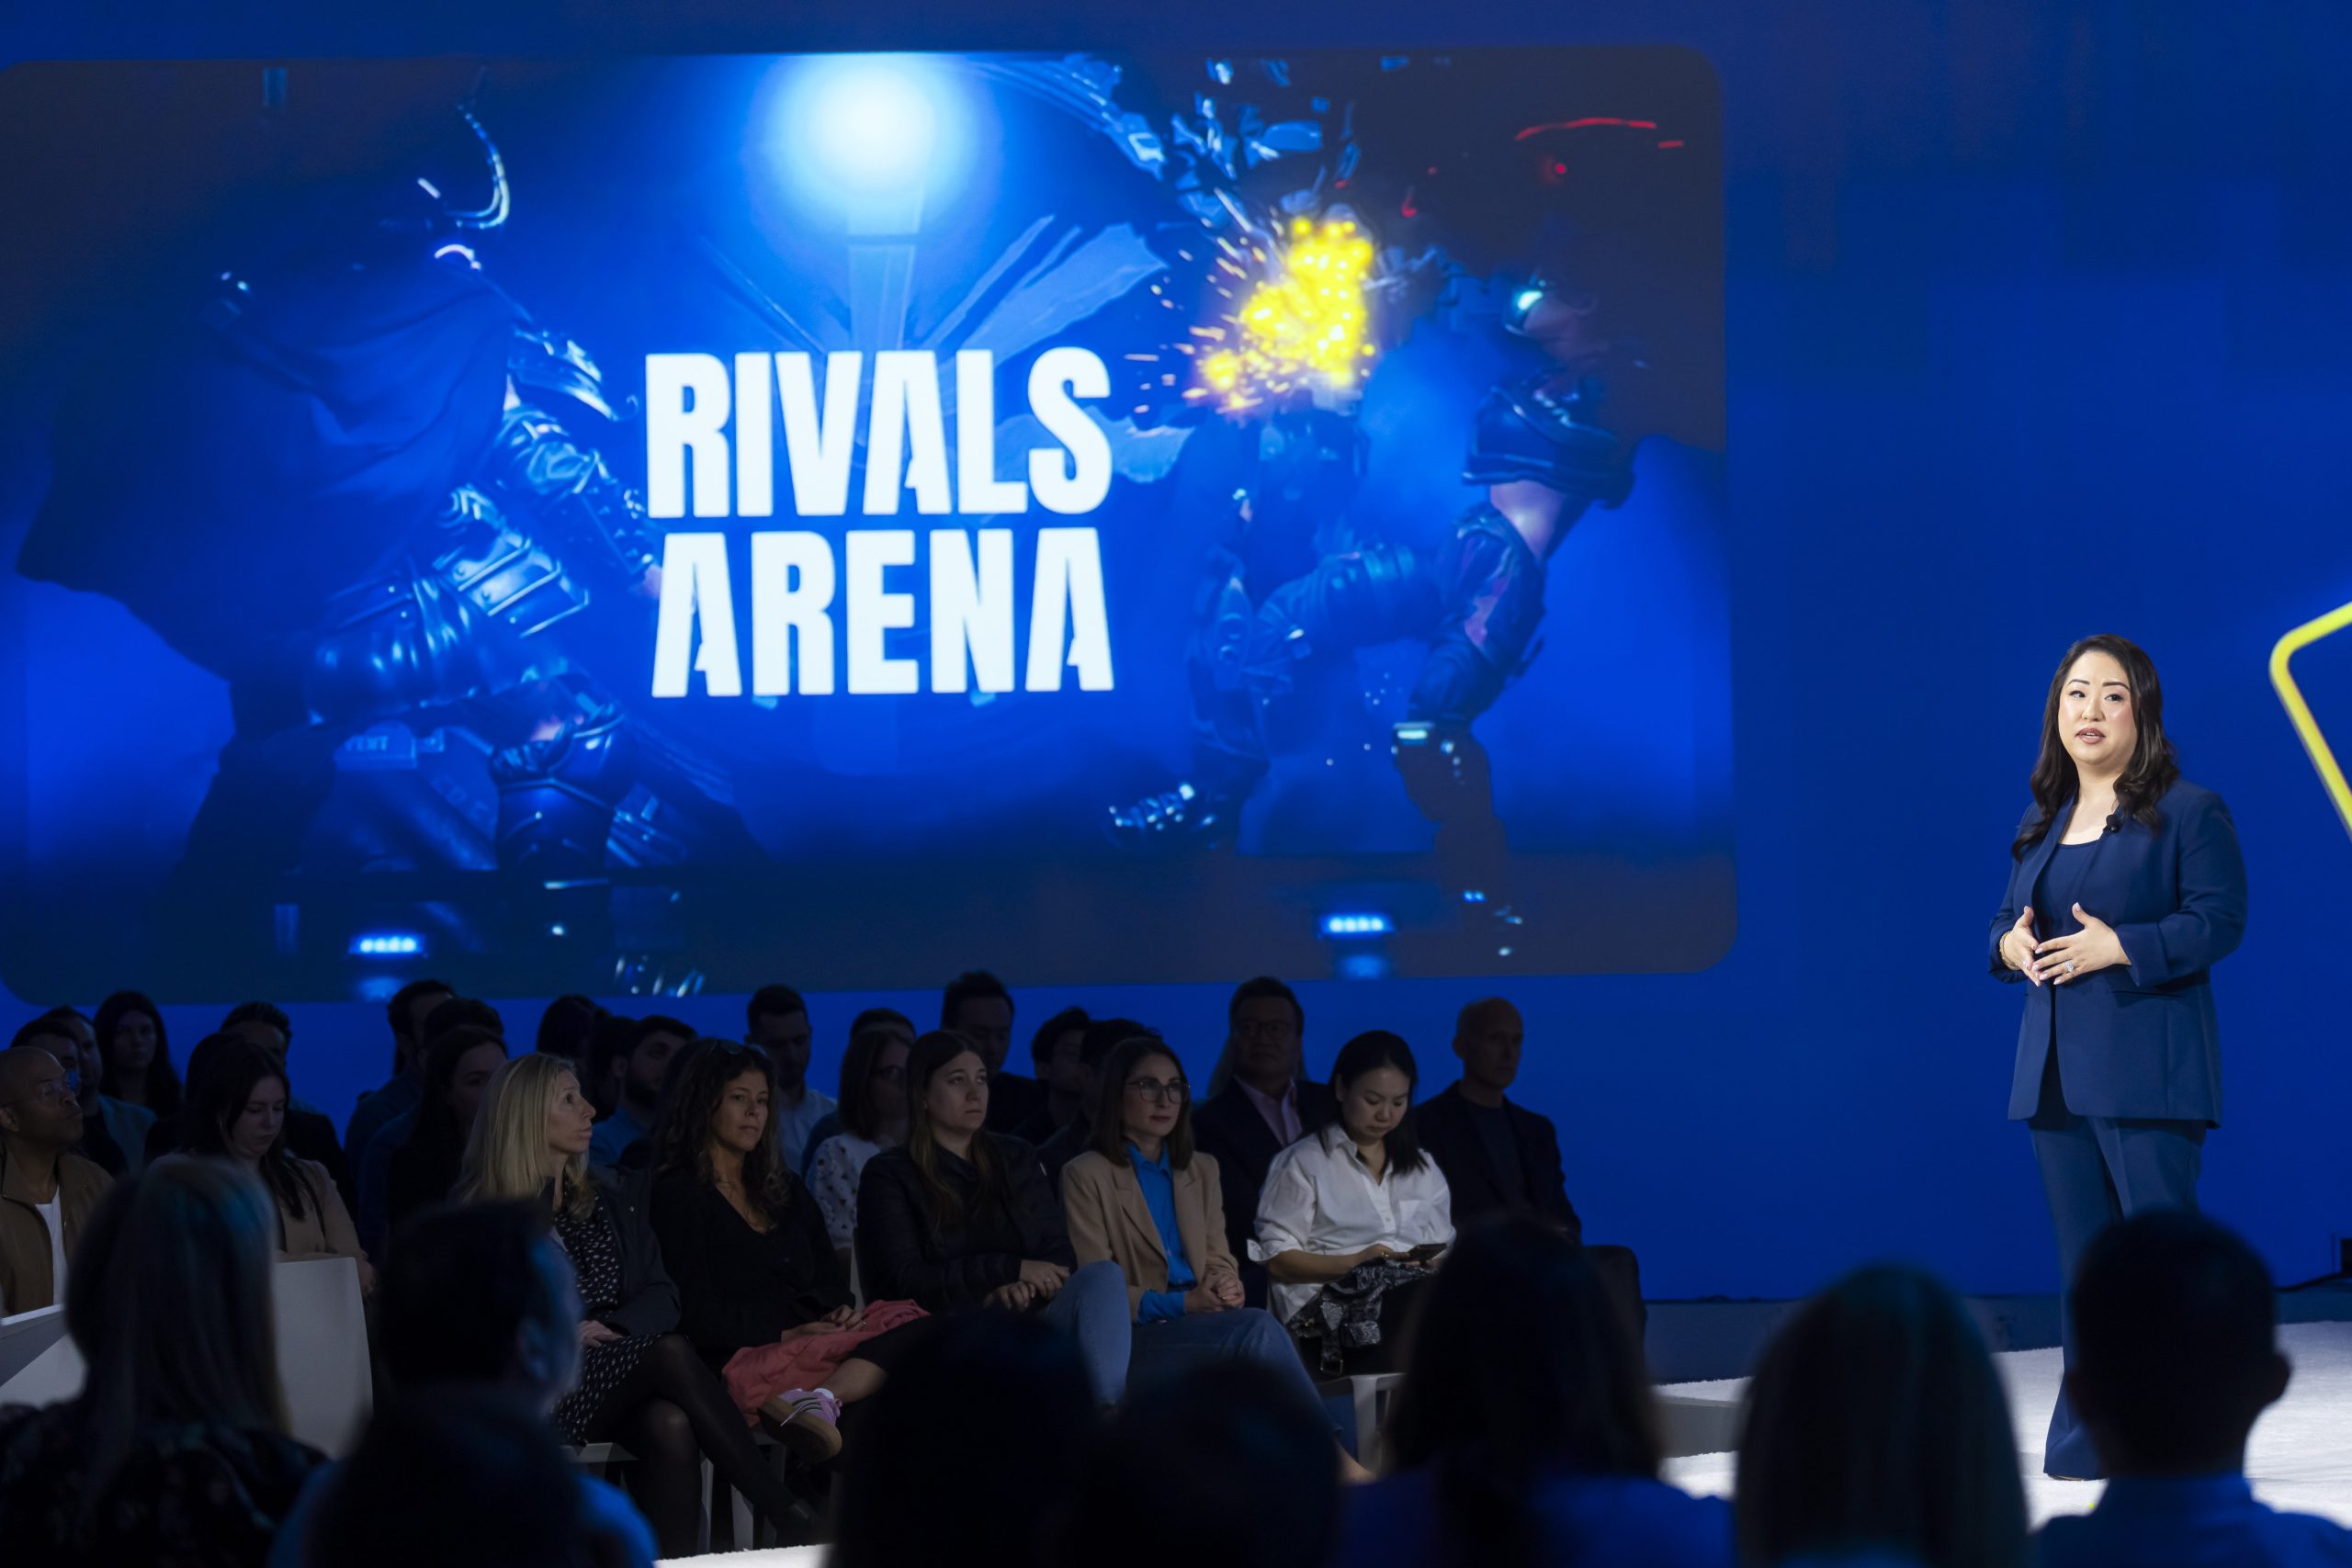 Speaker on stage with display image of Rivals Arena game